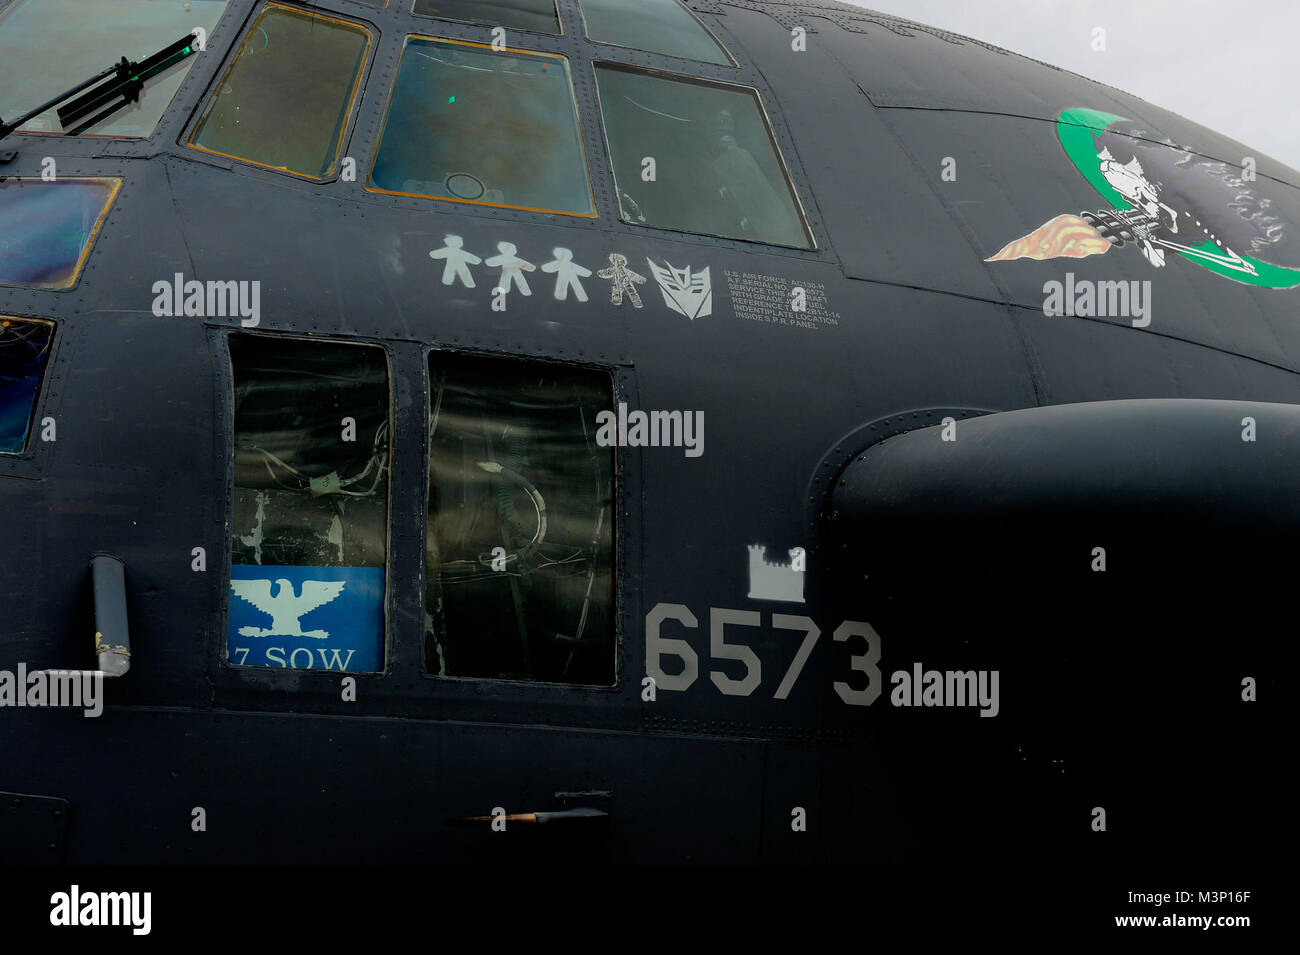 An AC-130H from the 16th Special Operations Squadron 'Heavy Metal', proudly displays its 'Decepticon' kill marking under the pilot's window April 8, 2015 at Cannon Air Force Base, N.M.  (U.S. Air Force photo by Staff Sgt. Matthew Plew) 110127-F-1644L-281 by AirmanMagazine Stock Photo